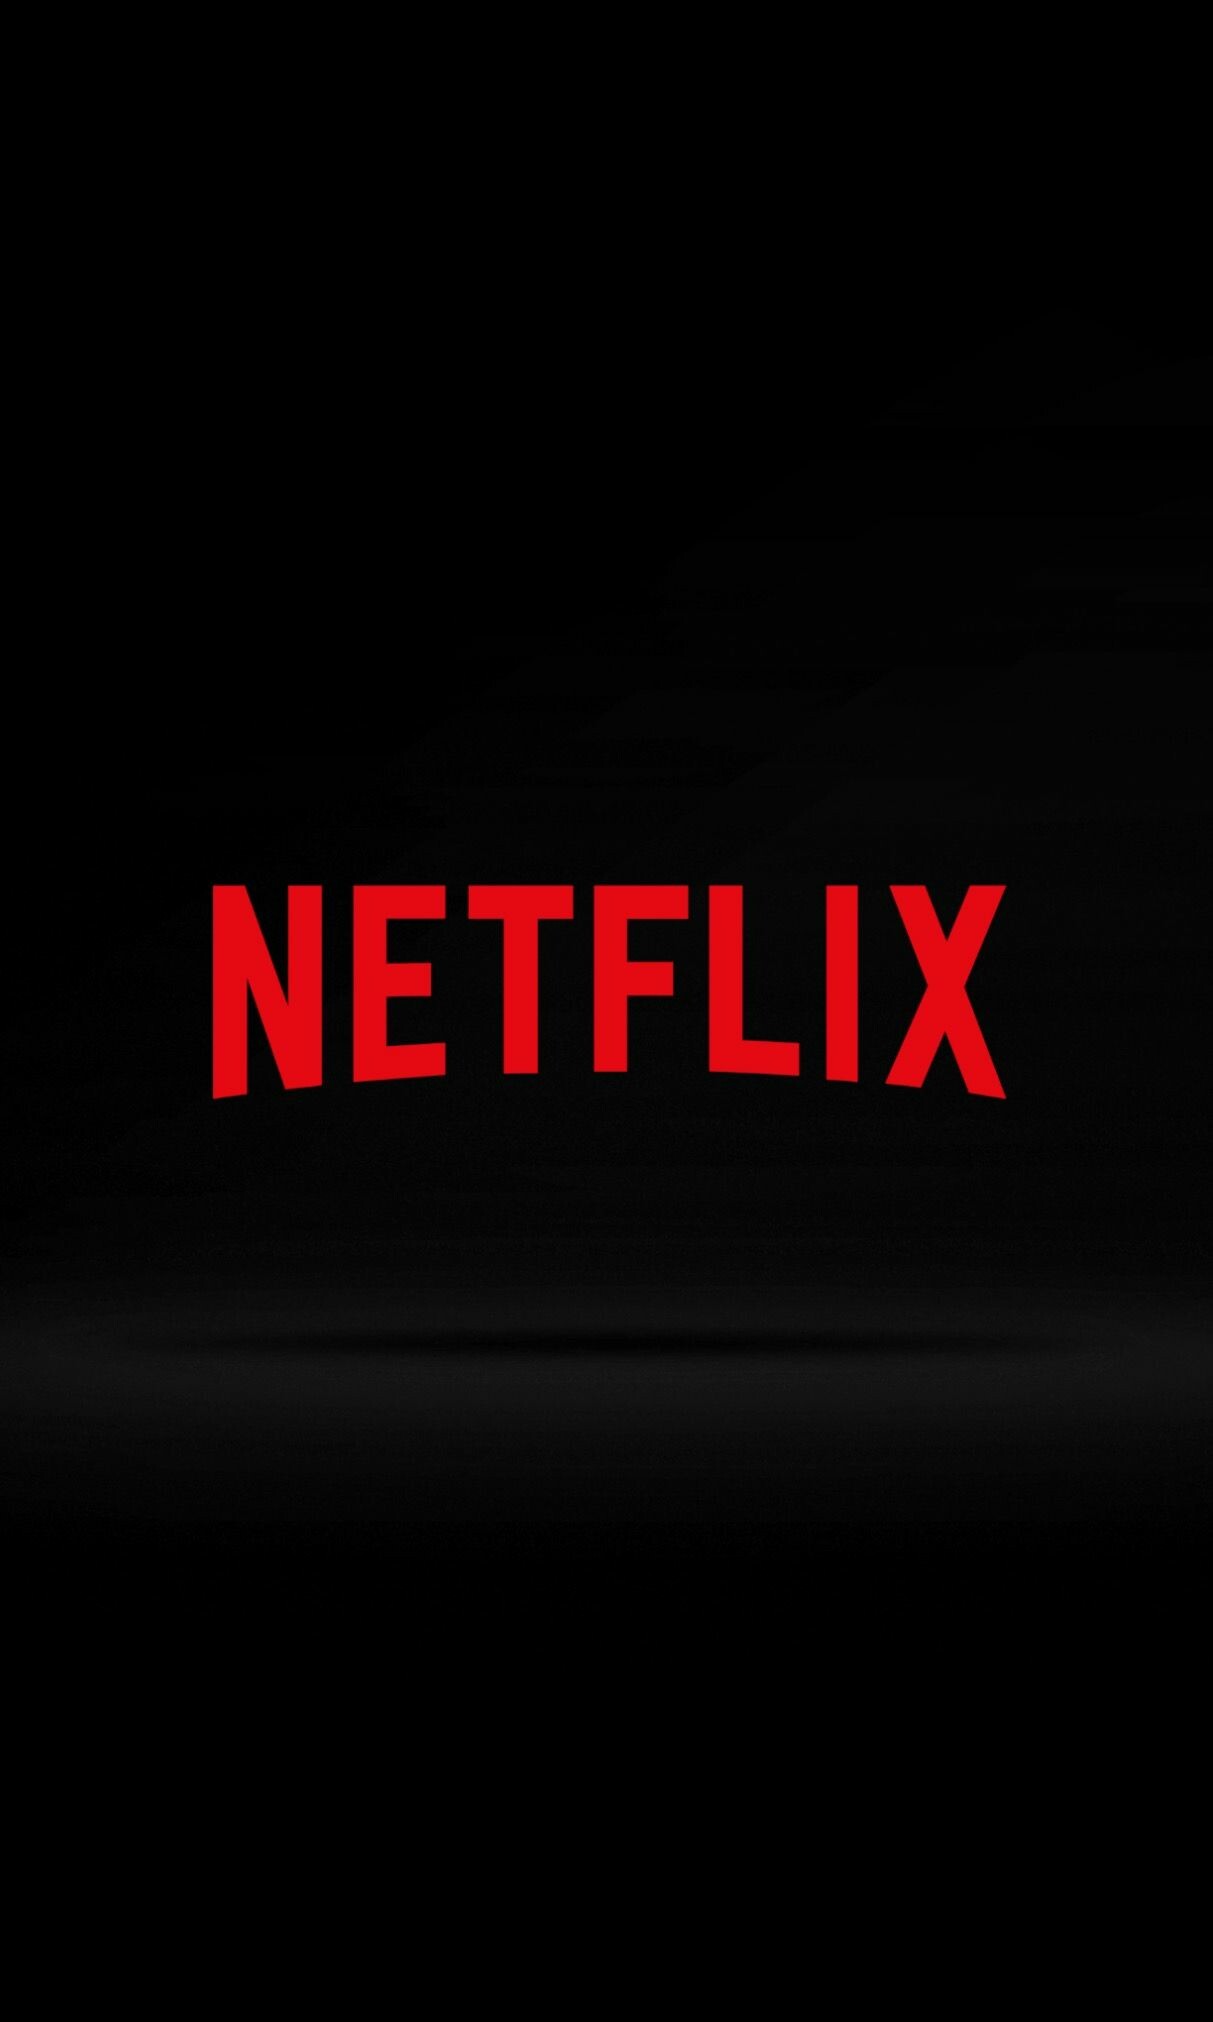 Netflix: Provides internet entertainment services for watching movies and television shows. 1220x2030 HD Wallpaper.